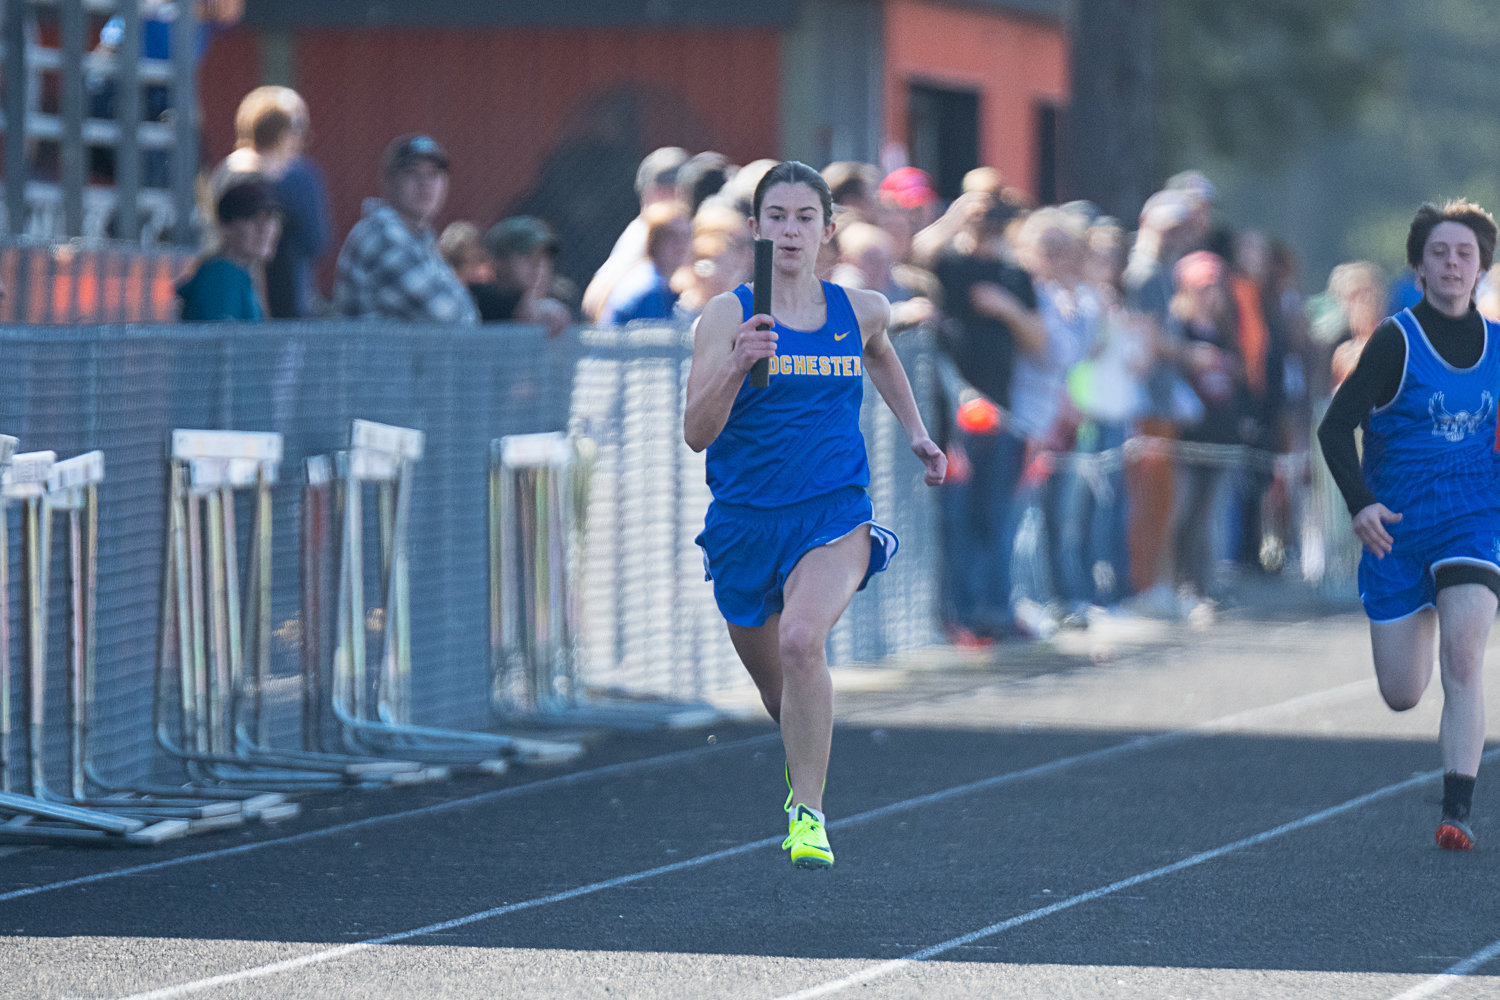 Rochester's Moran Hurst crosses the finish line during a heat in the girls 4x100 relay at the Rainier Icebreaker on March 18.